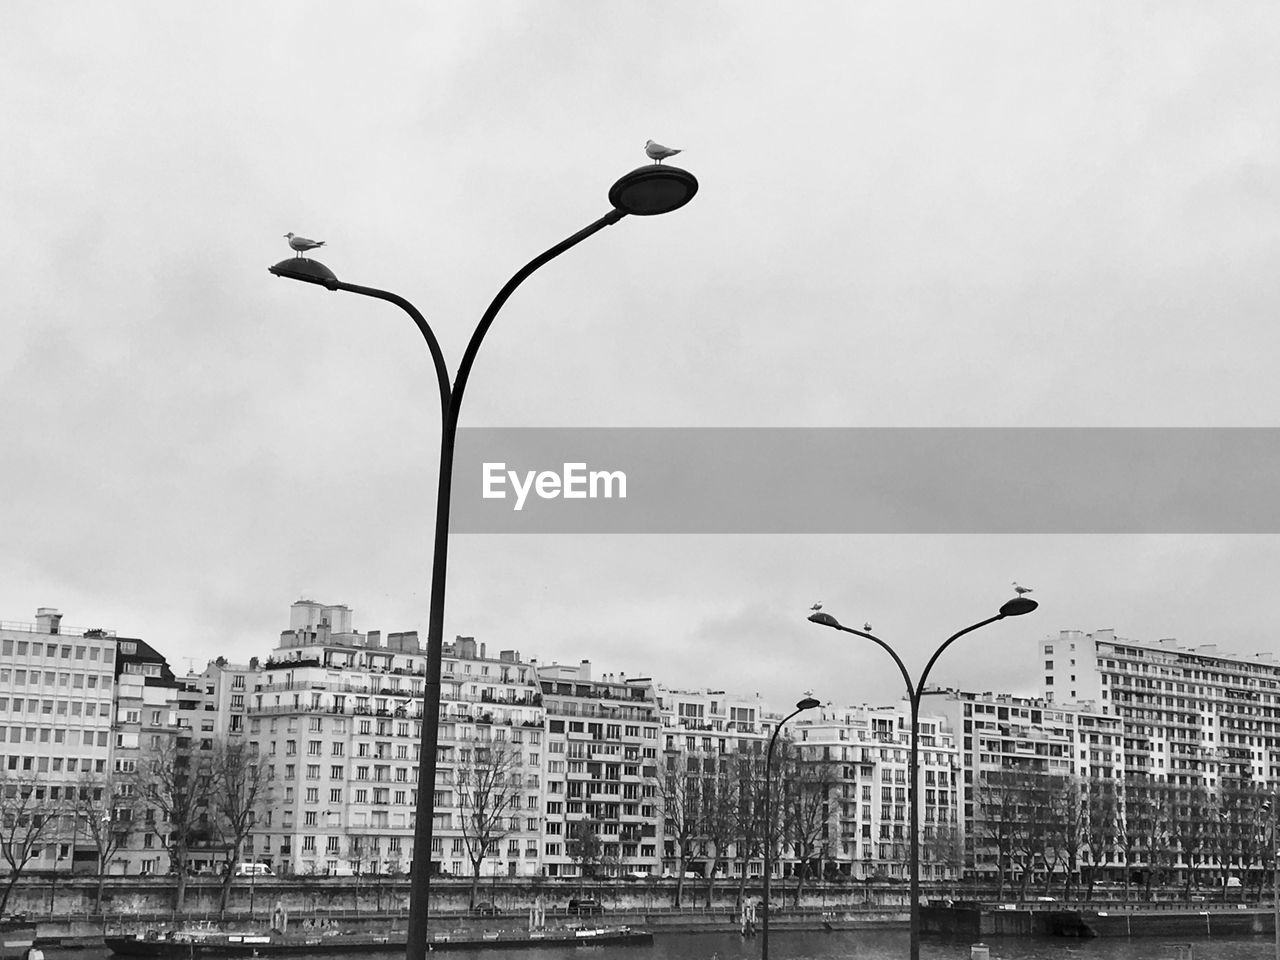 Low angle view of street lights with perching seagulls in paris 